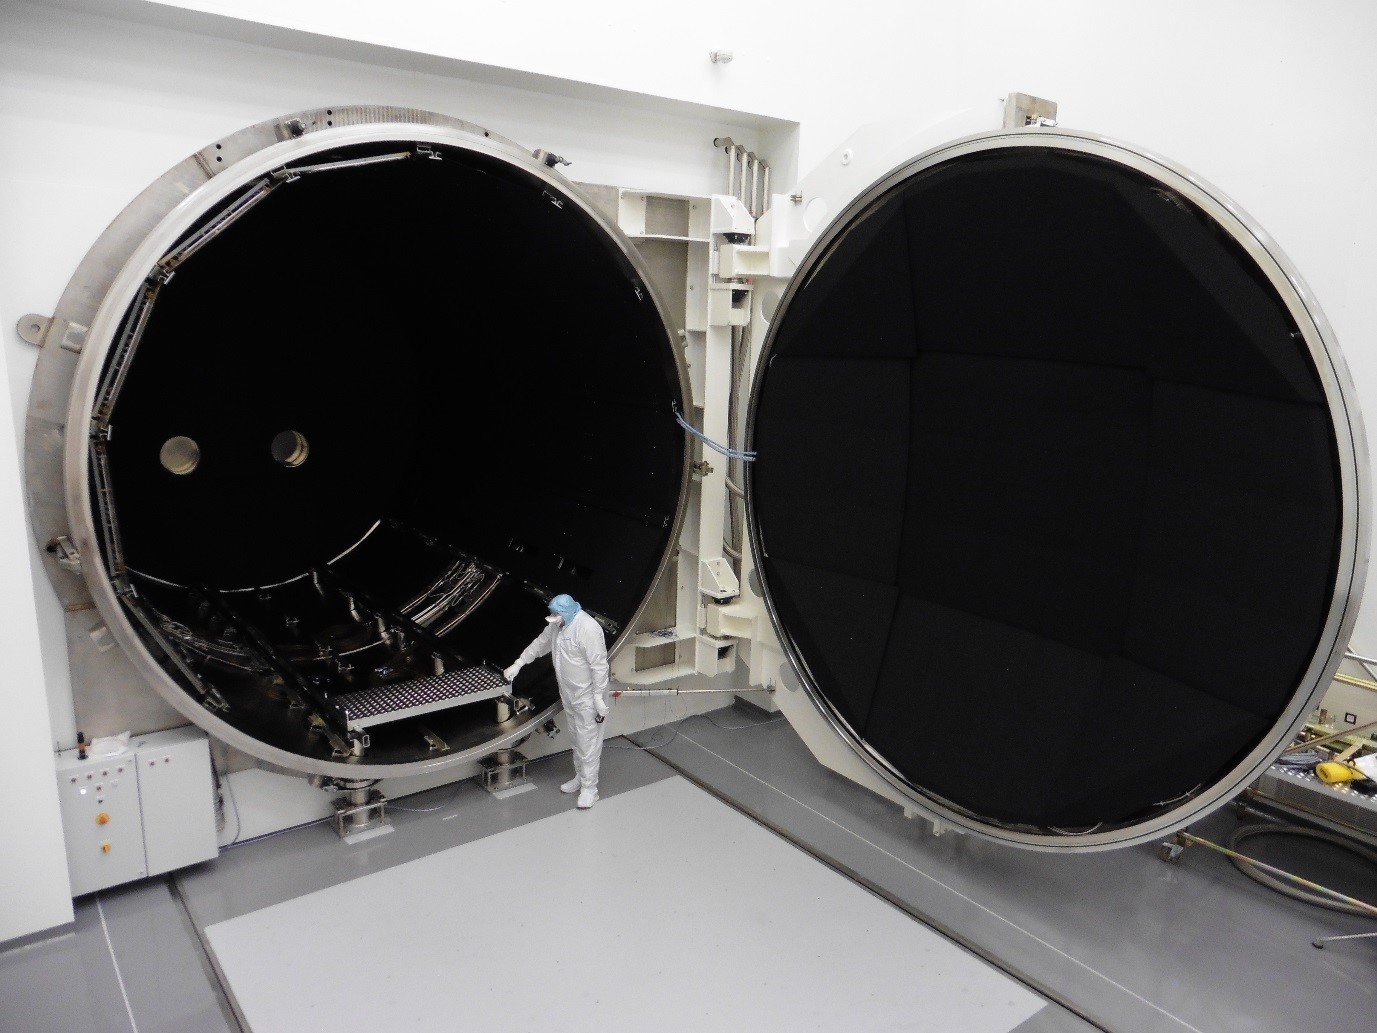 5m wide chamber lined with black shrouds to simulate space.